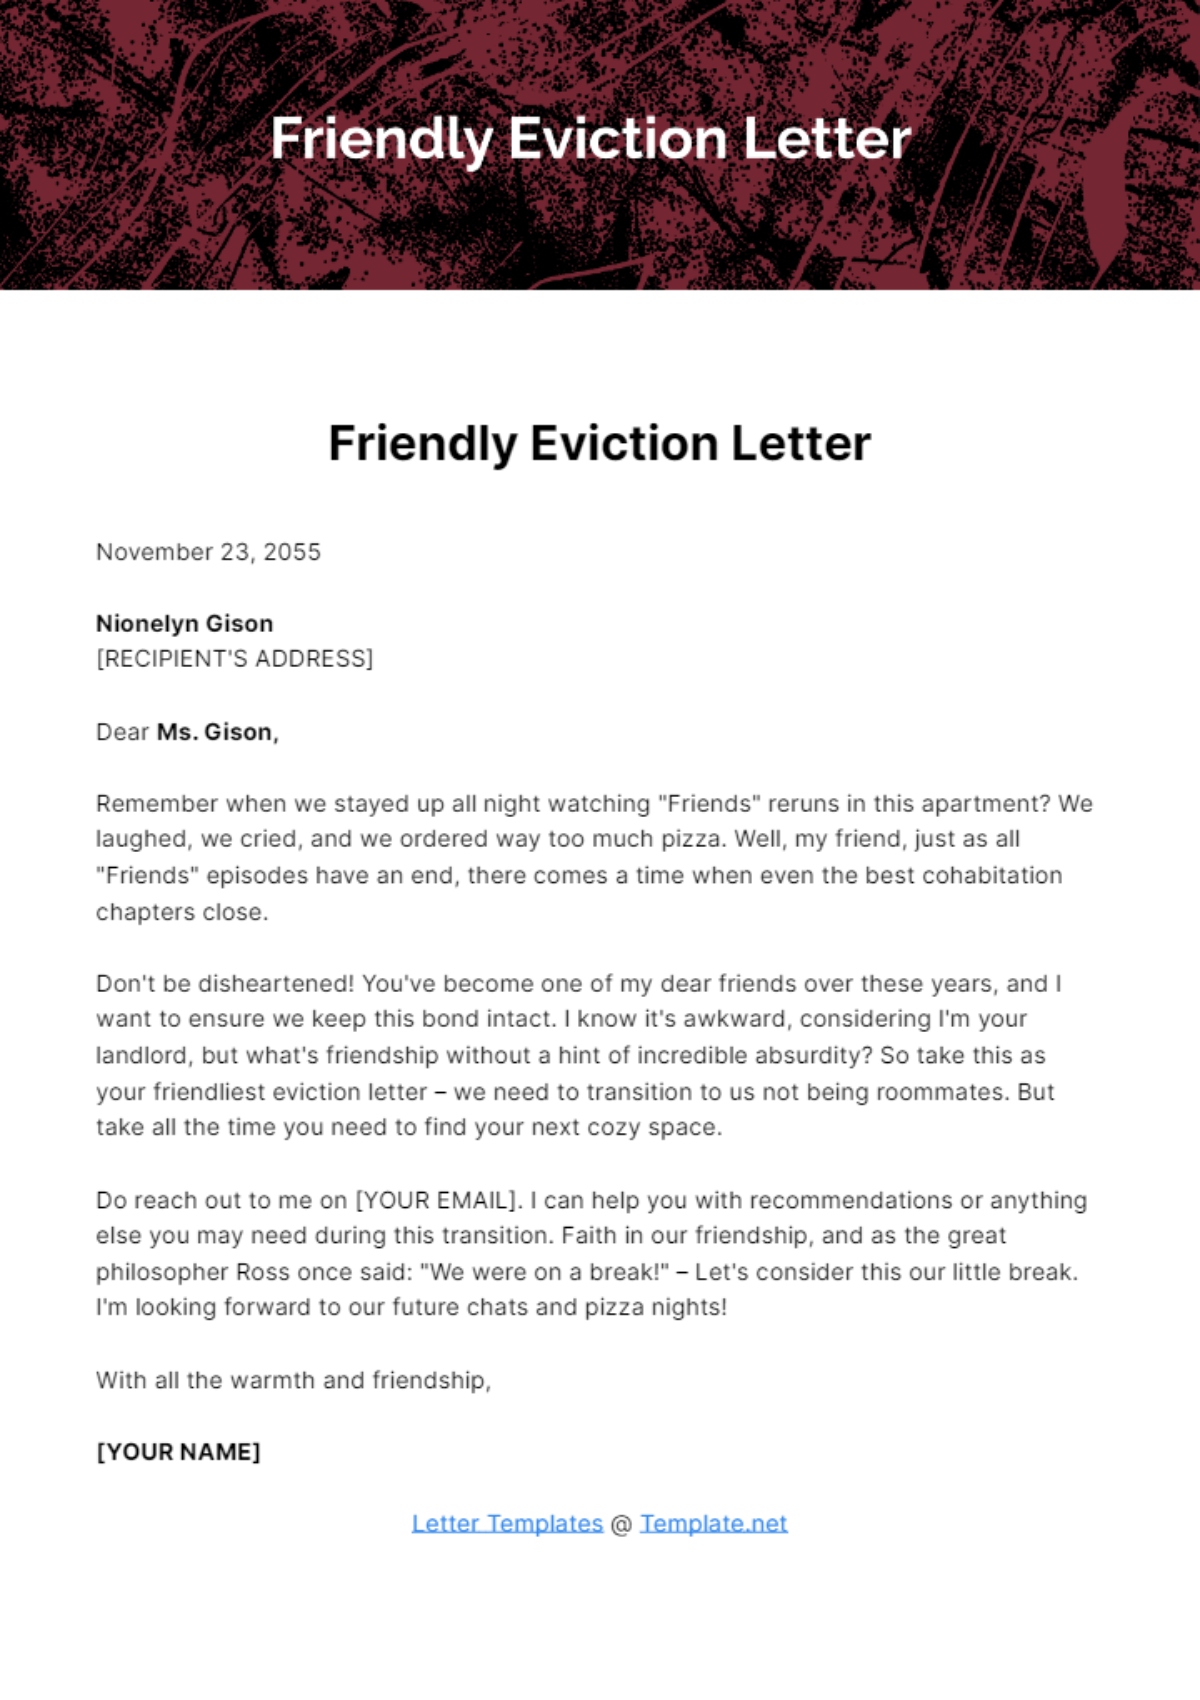 Free Friendly Eviction Letter Template